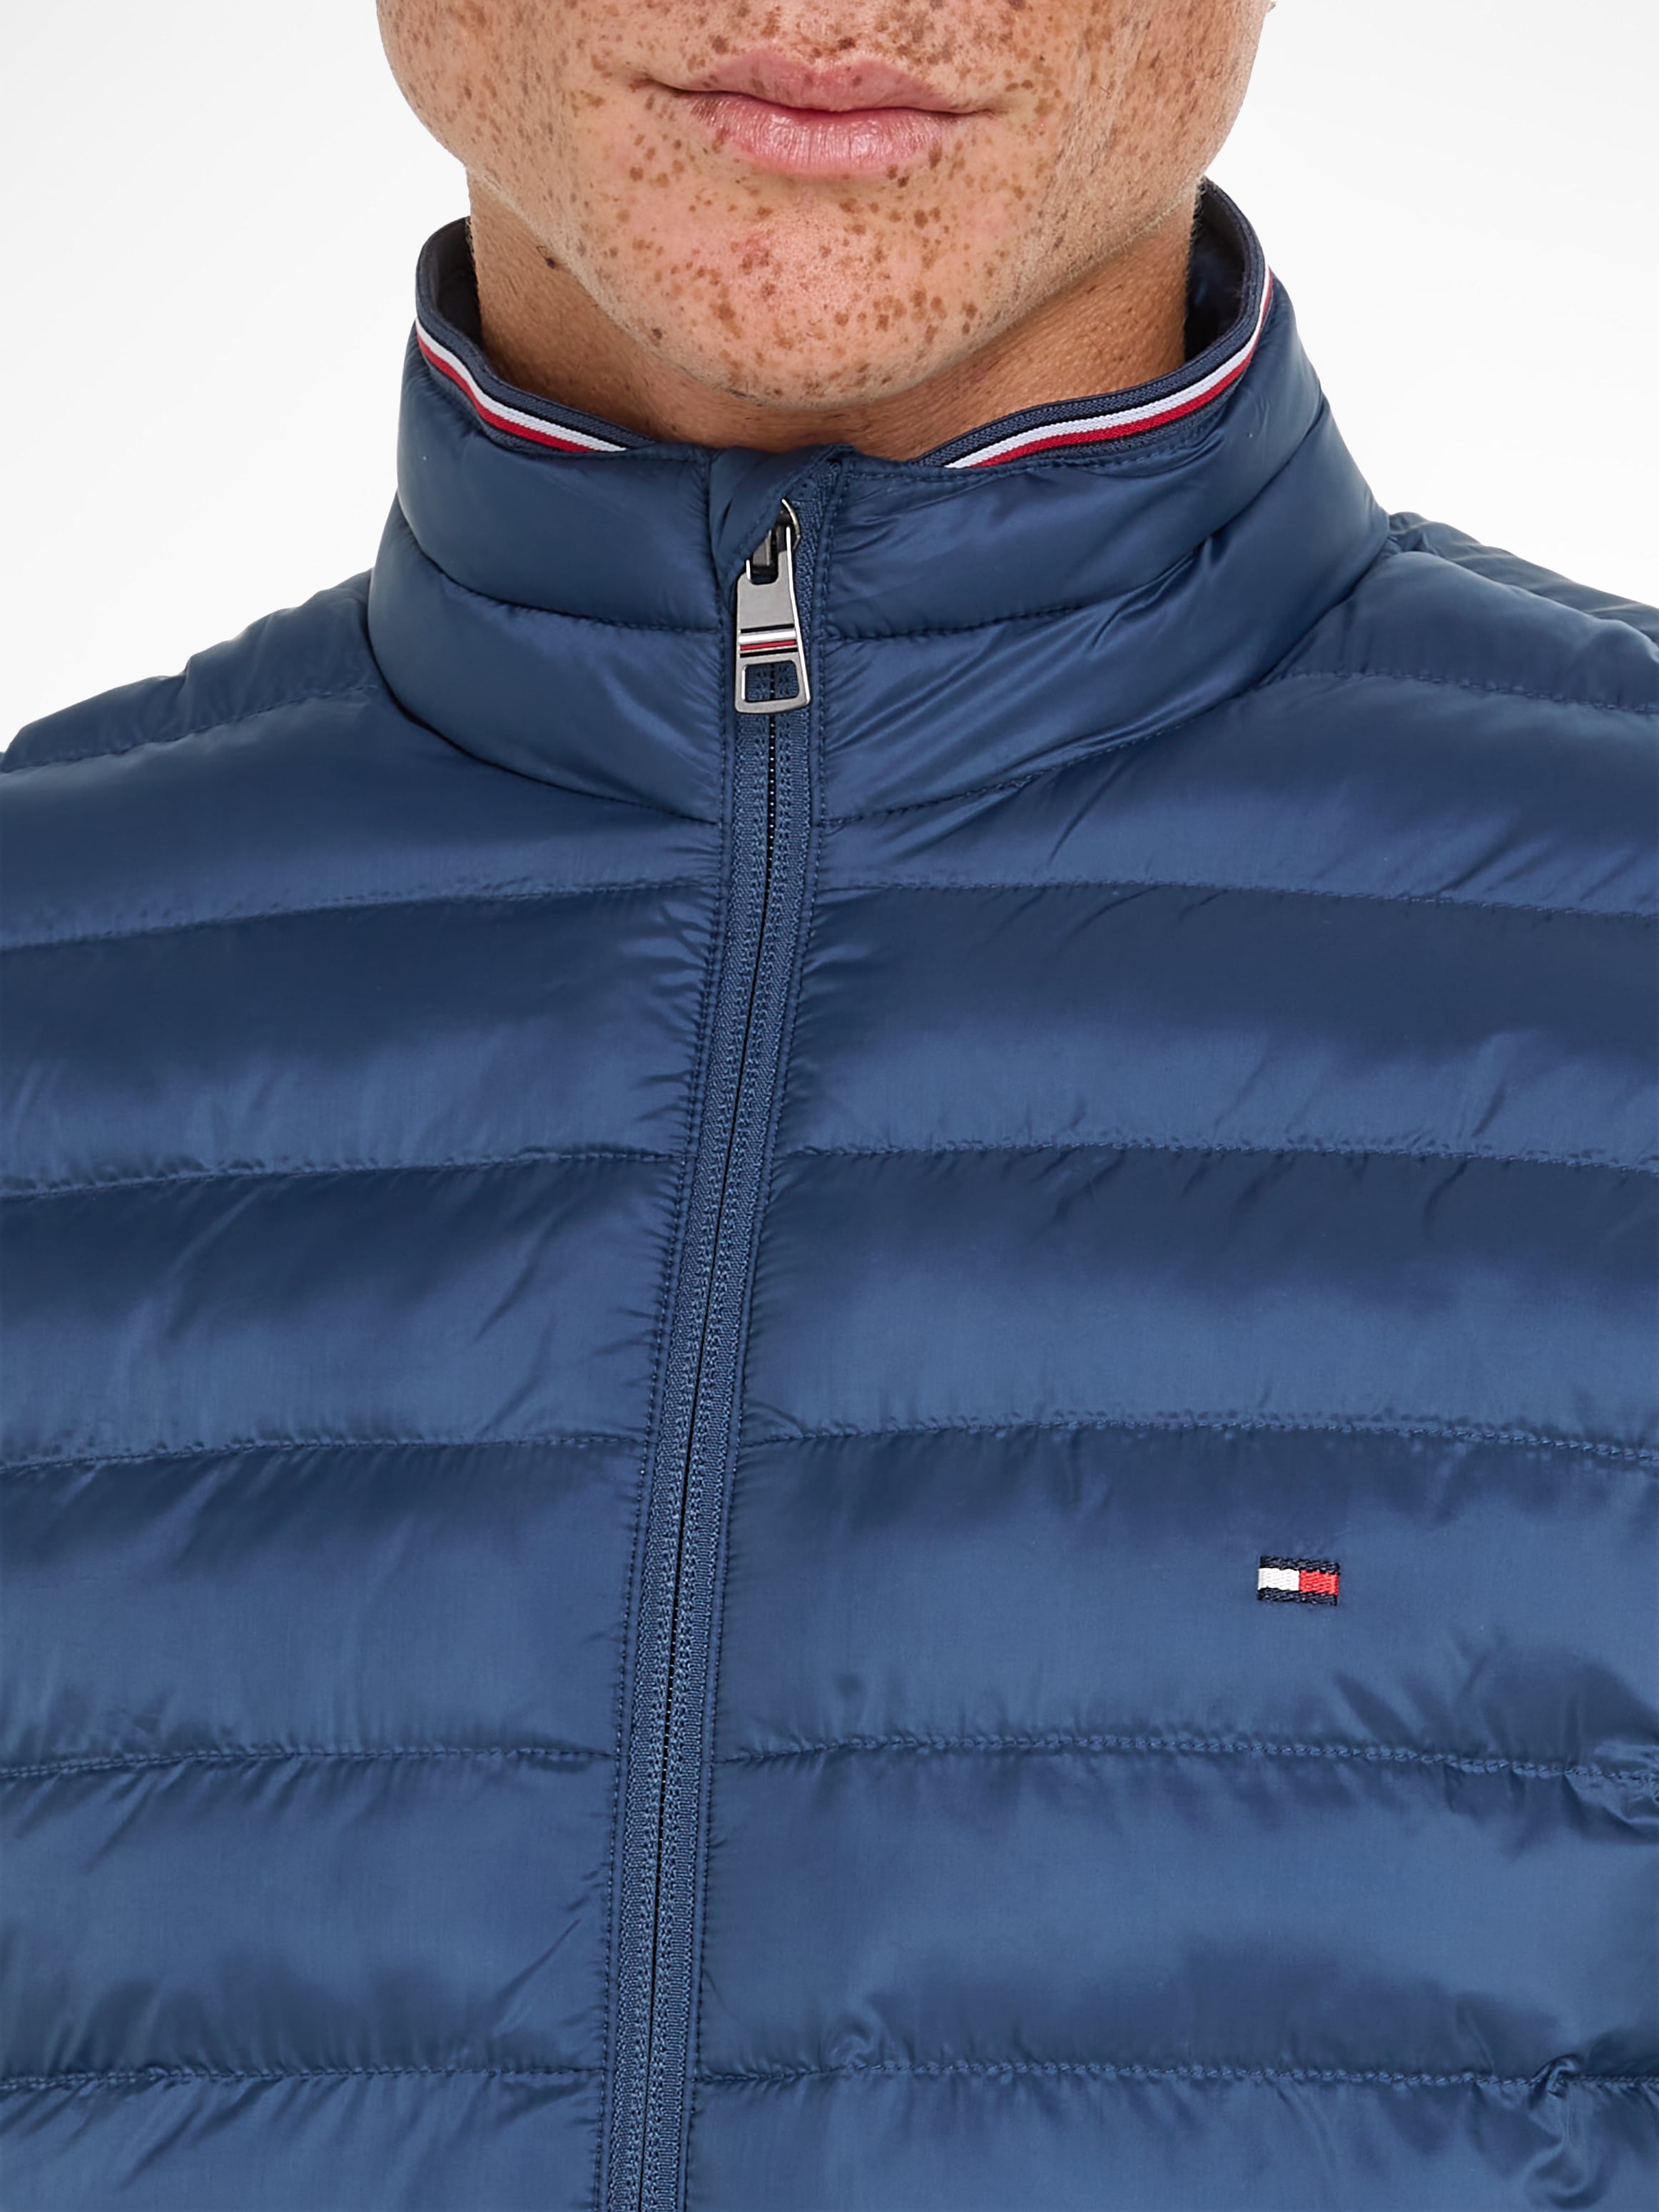 Tommy Hilfiger Steppjacke »PACKABLE RECYCLED JACKET«, mit Tommy Hilfiger Logostickerei